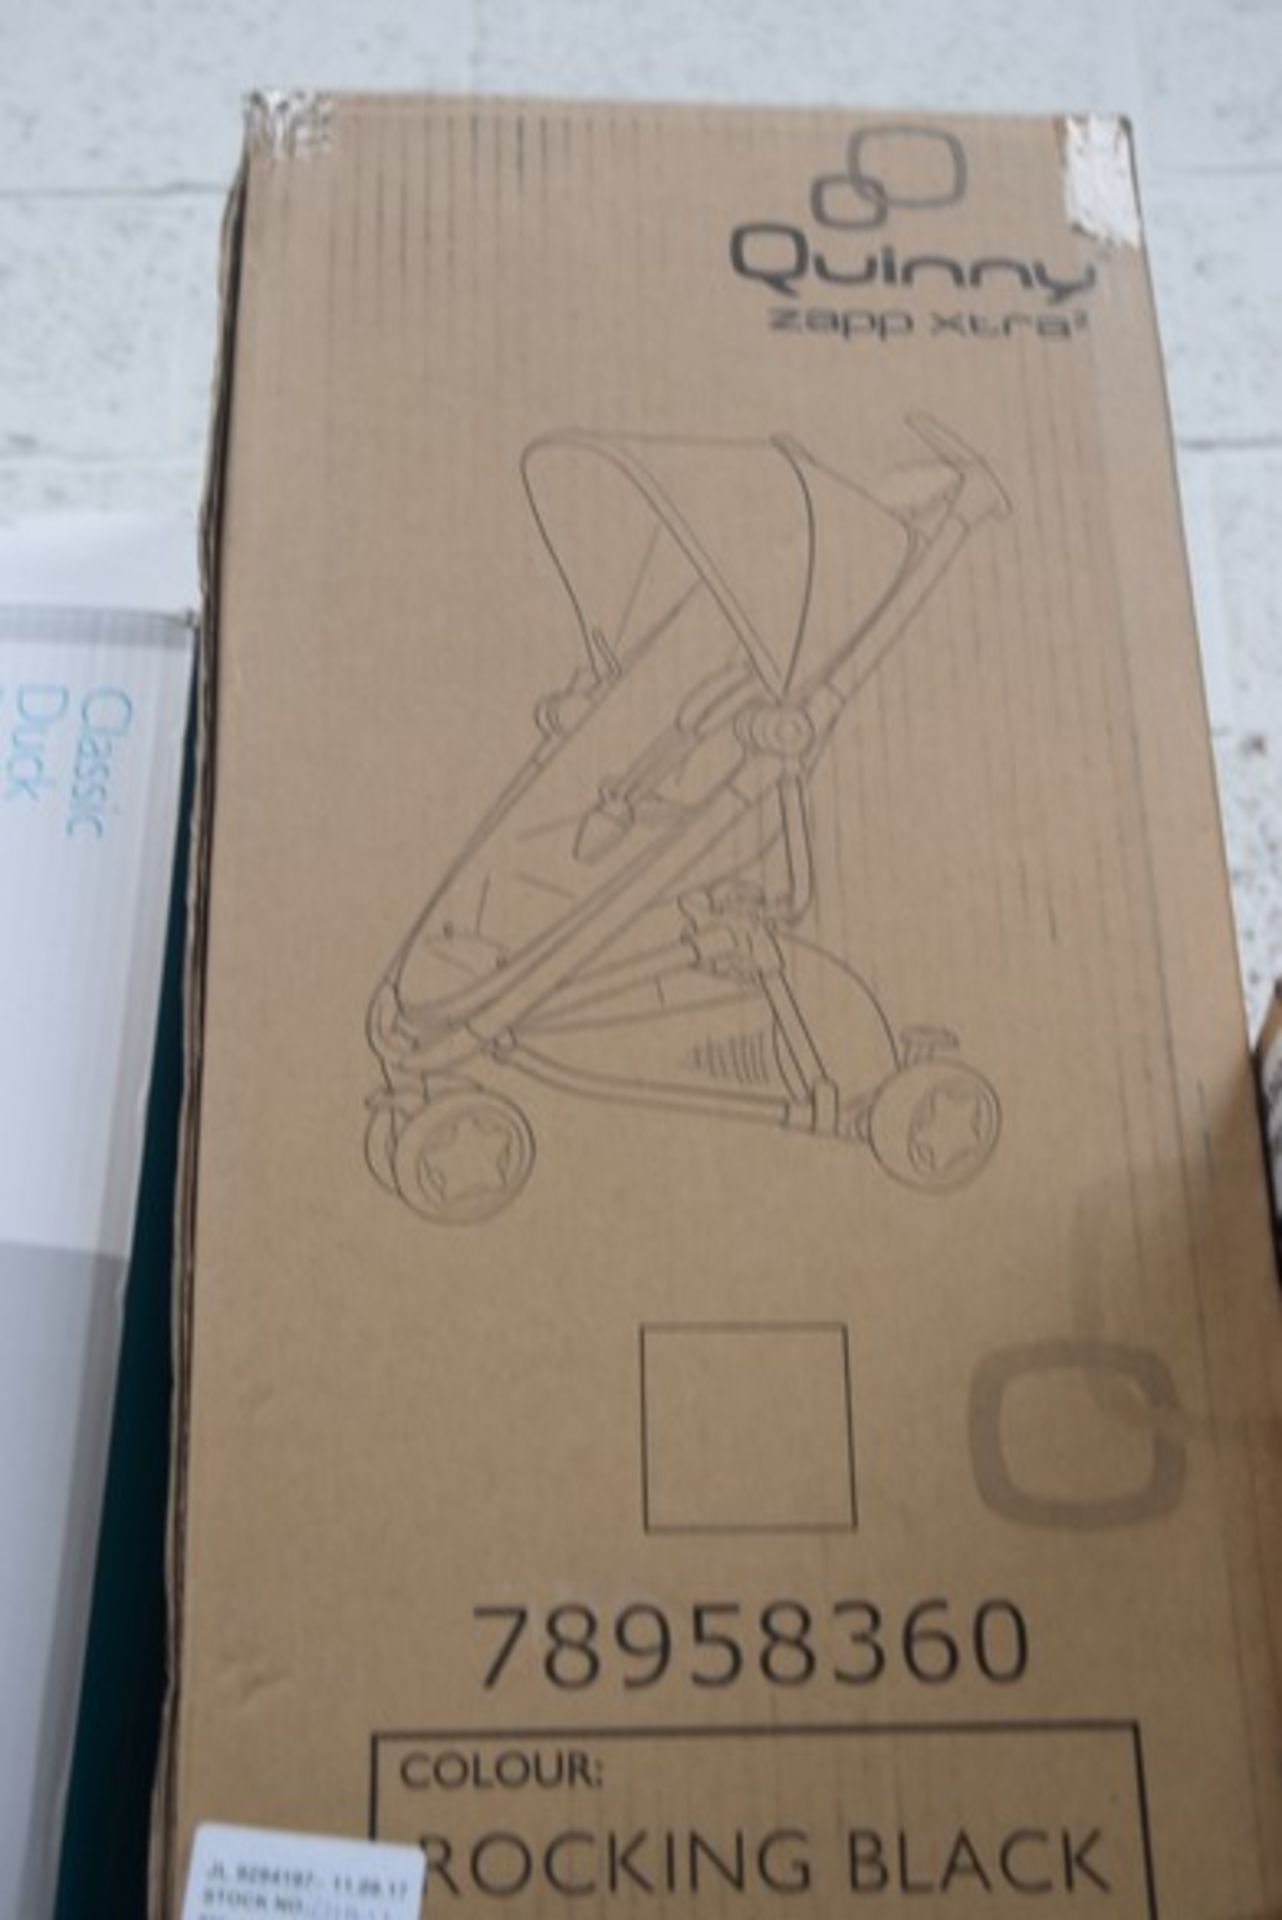 1 x BOXED QUINNY ZAPP XTRA 2 STROLLER RRP £200 11.09.14 (3311213) *PLEASE NOTE THAT THE BID PRICE IS